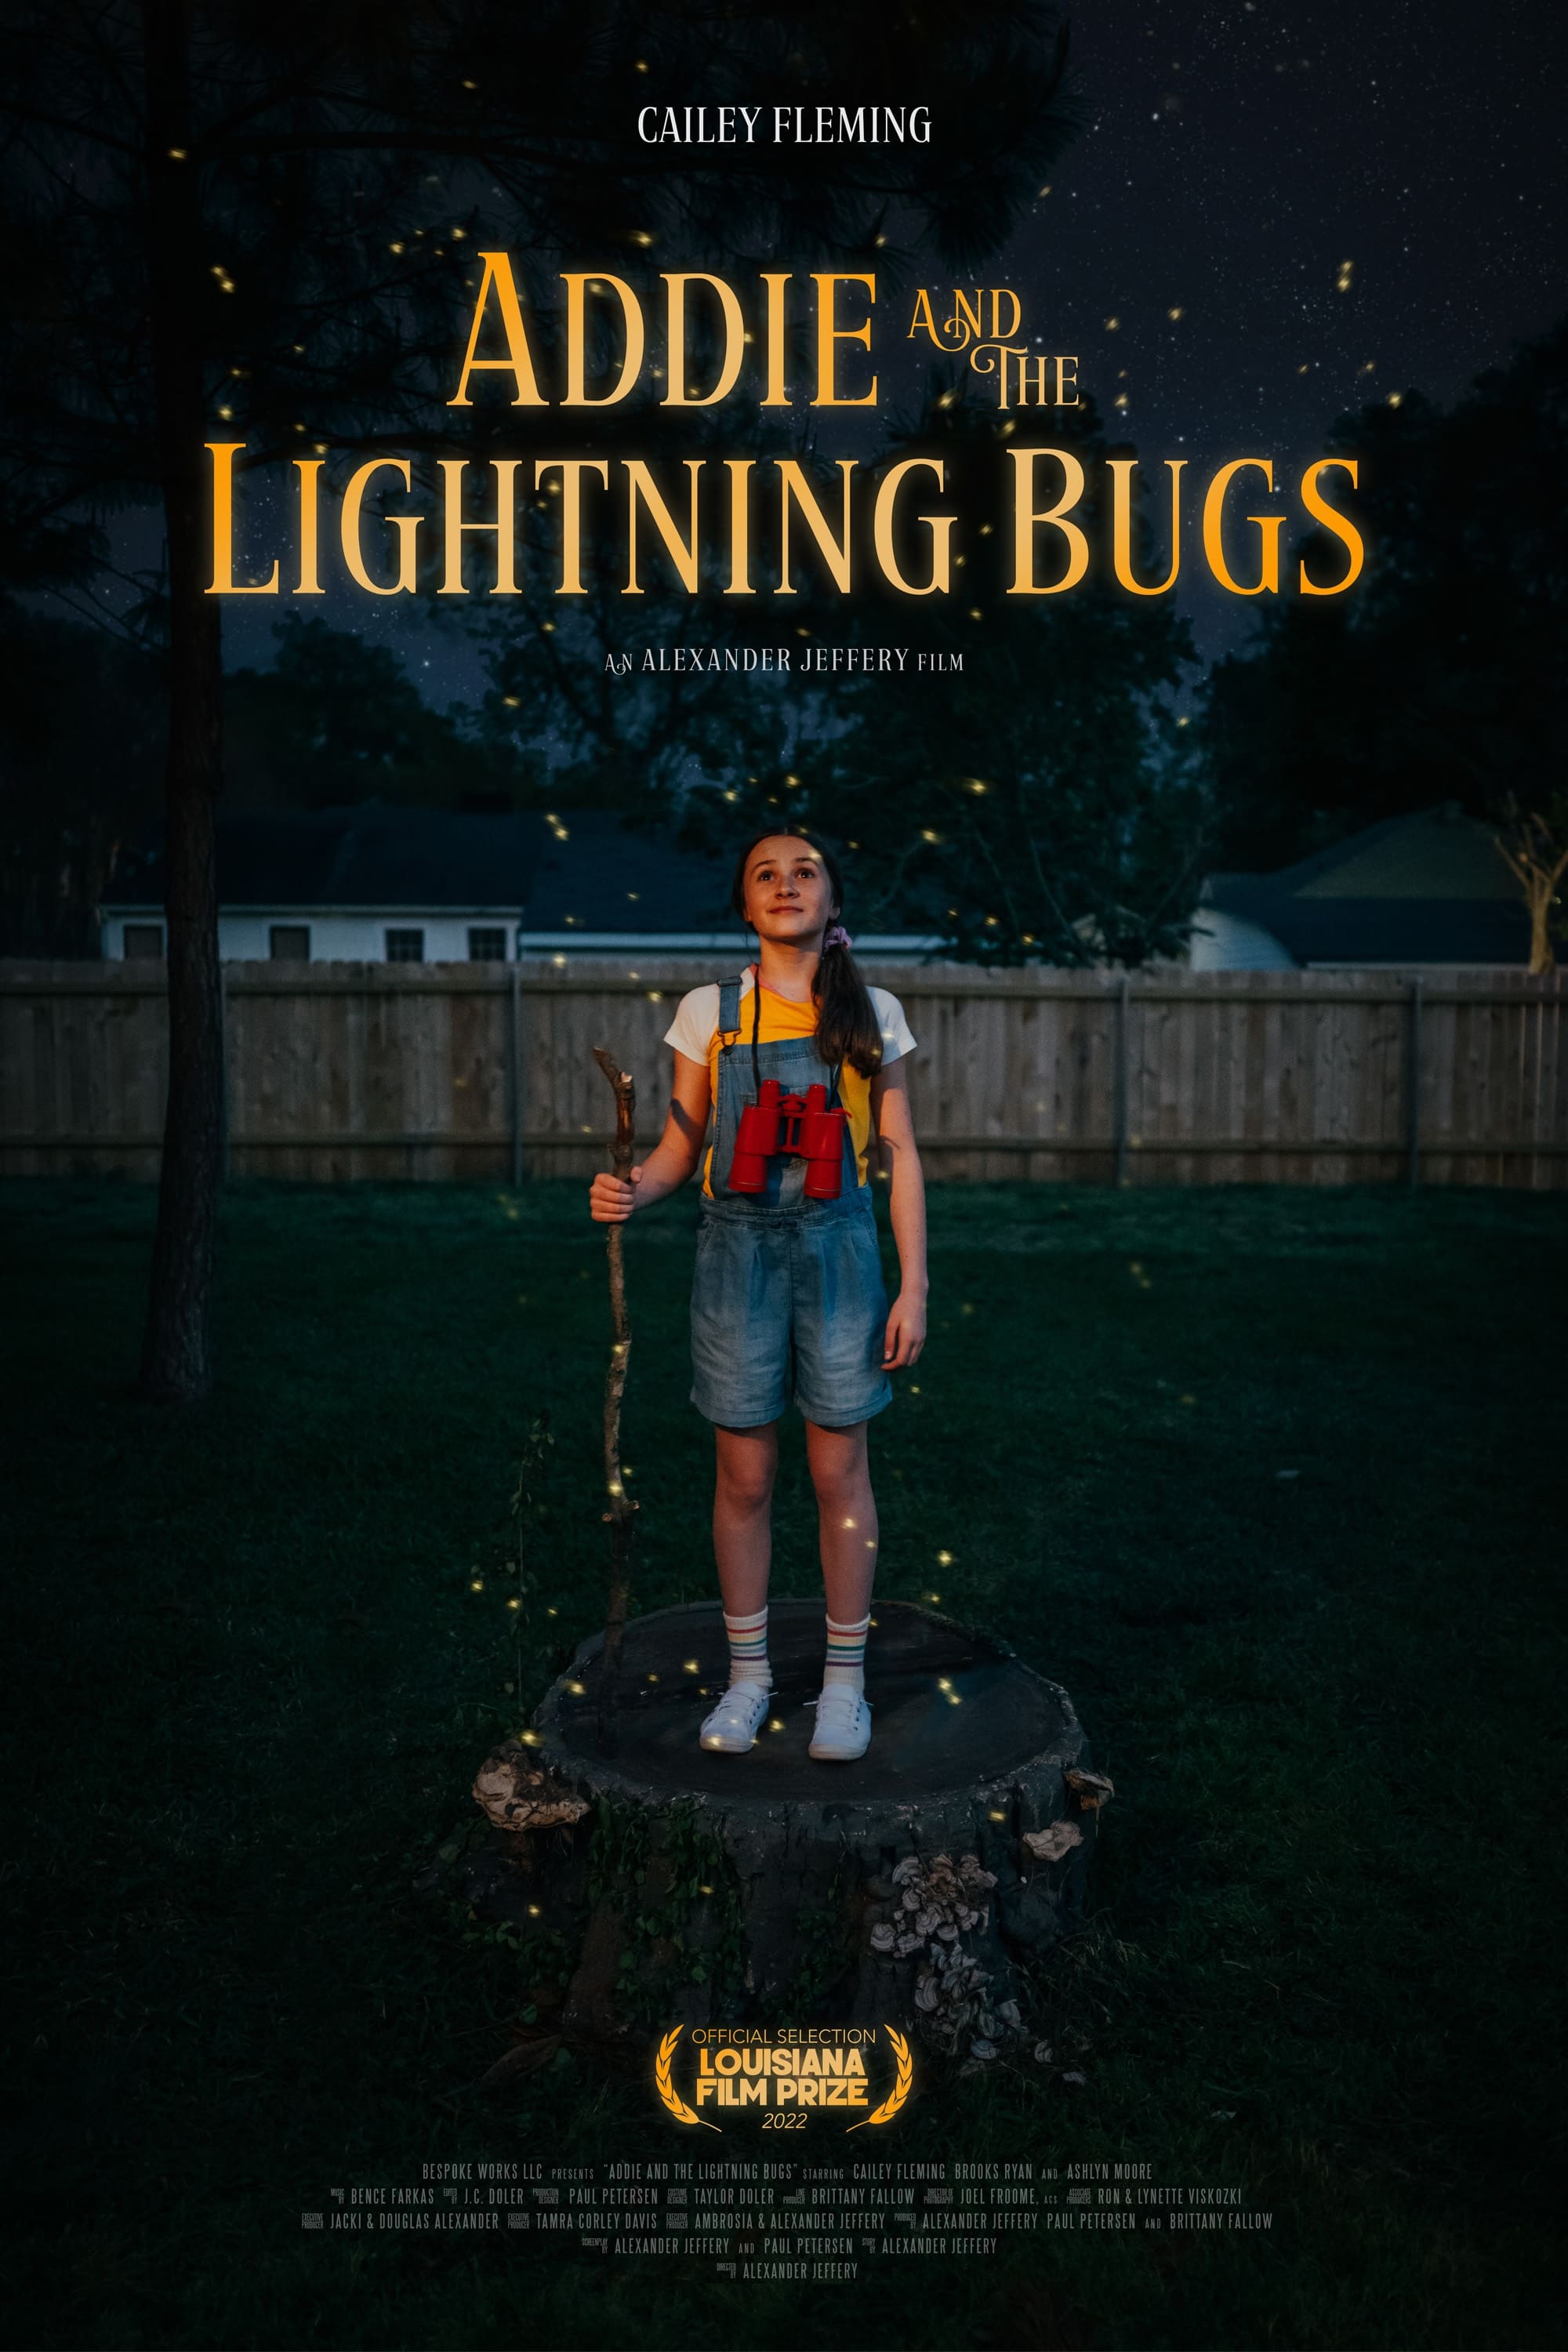 Addie and the Lightning Bugs